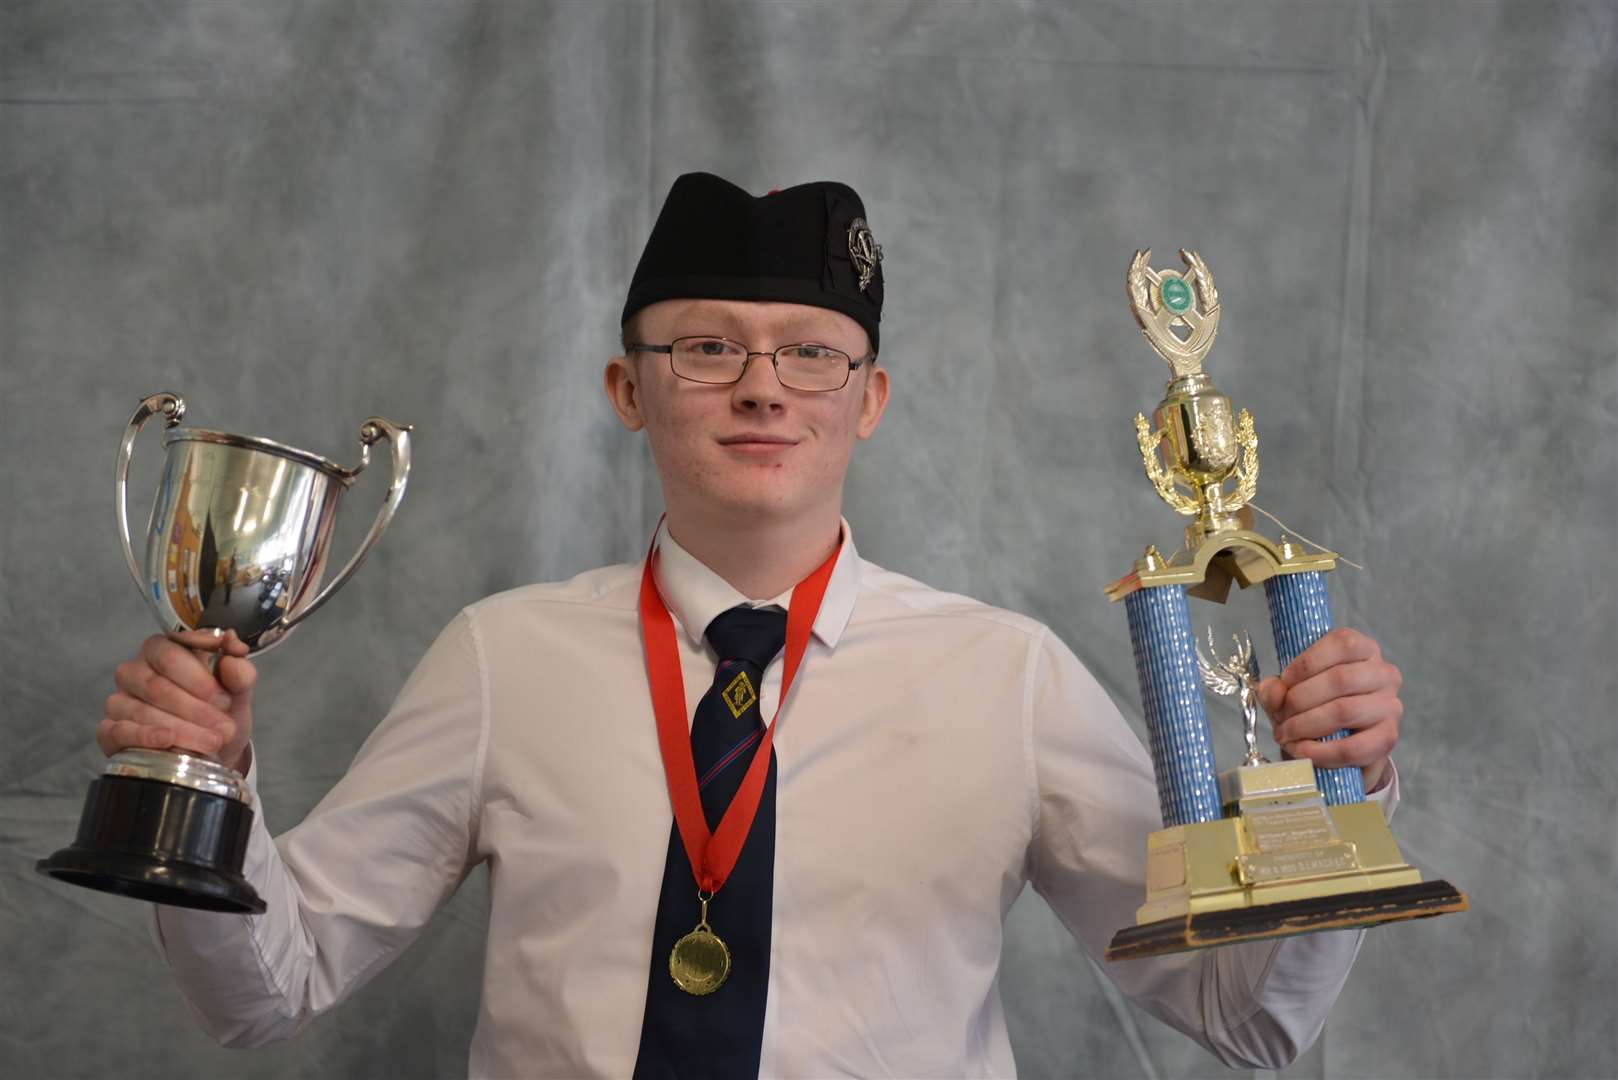 Arran King, Halkirk - Overall winner for piobaireachd and march, strathspey and reel. Picture: Jim A Johnston